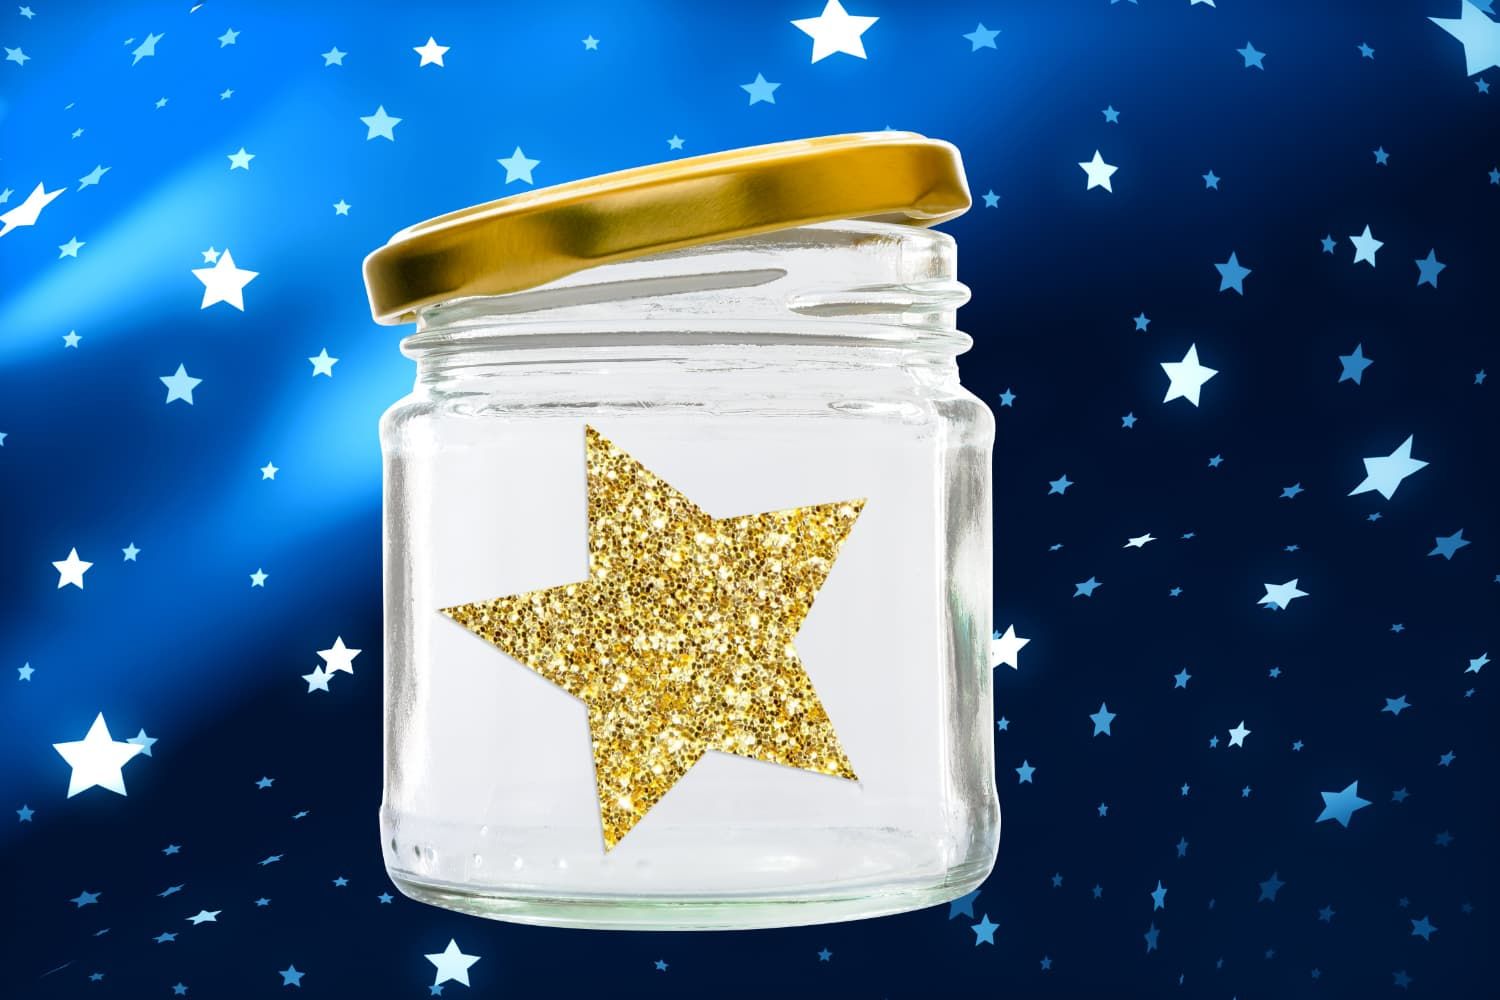 Object%20lesson%20-%20Stars%20in%20a%20jar-6132cbc5 Genesis